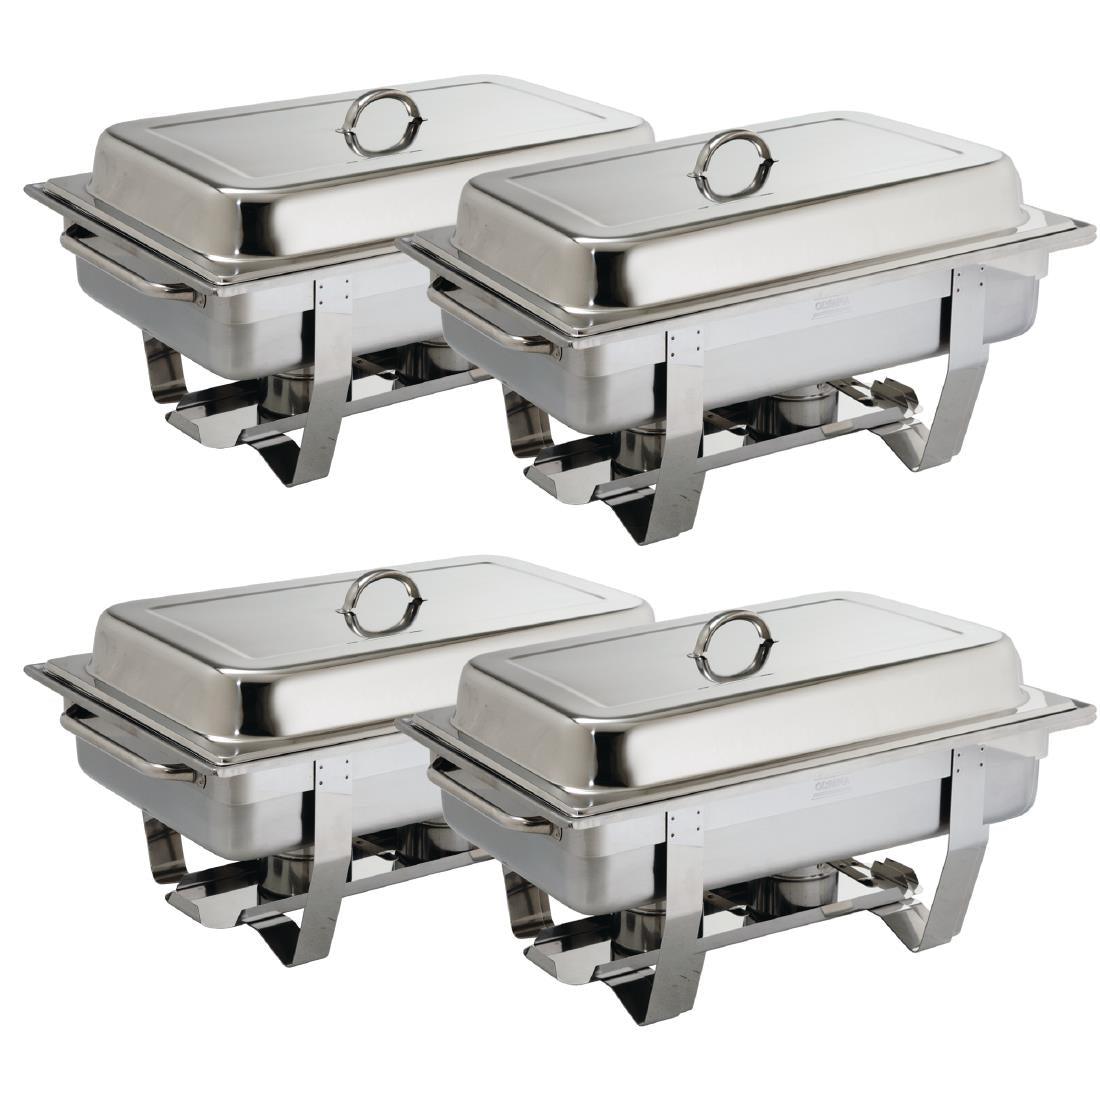 Olympia Milan Chafing Dish Special Offer - HospoStore